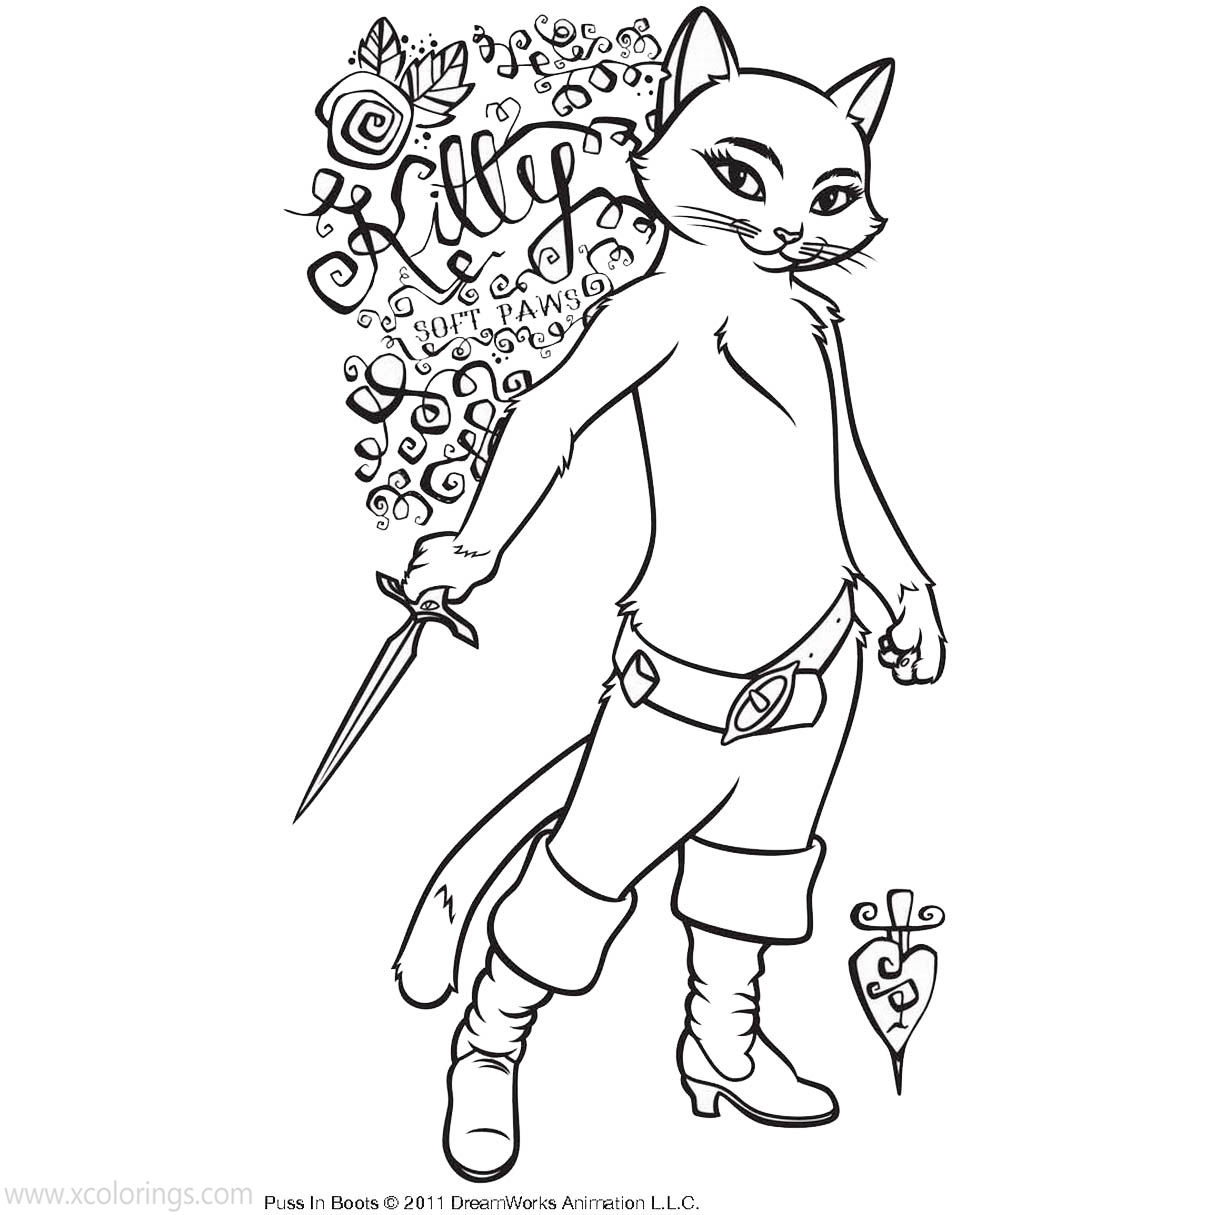 Free Kitty from Puss in Boots Coloring Pages printable